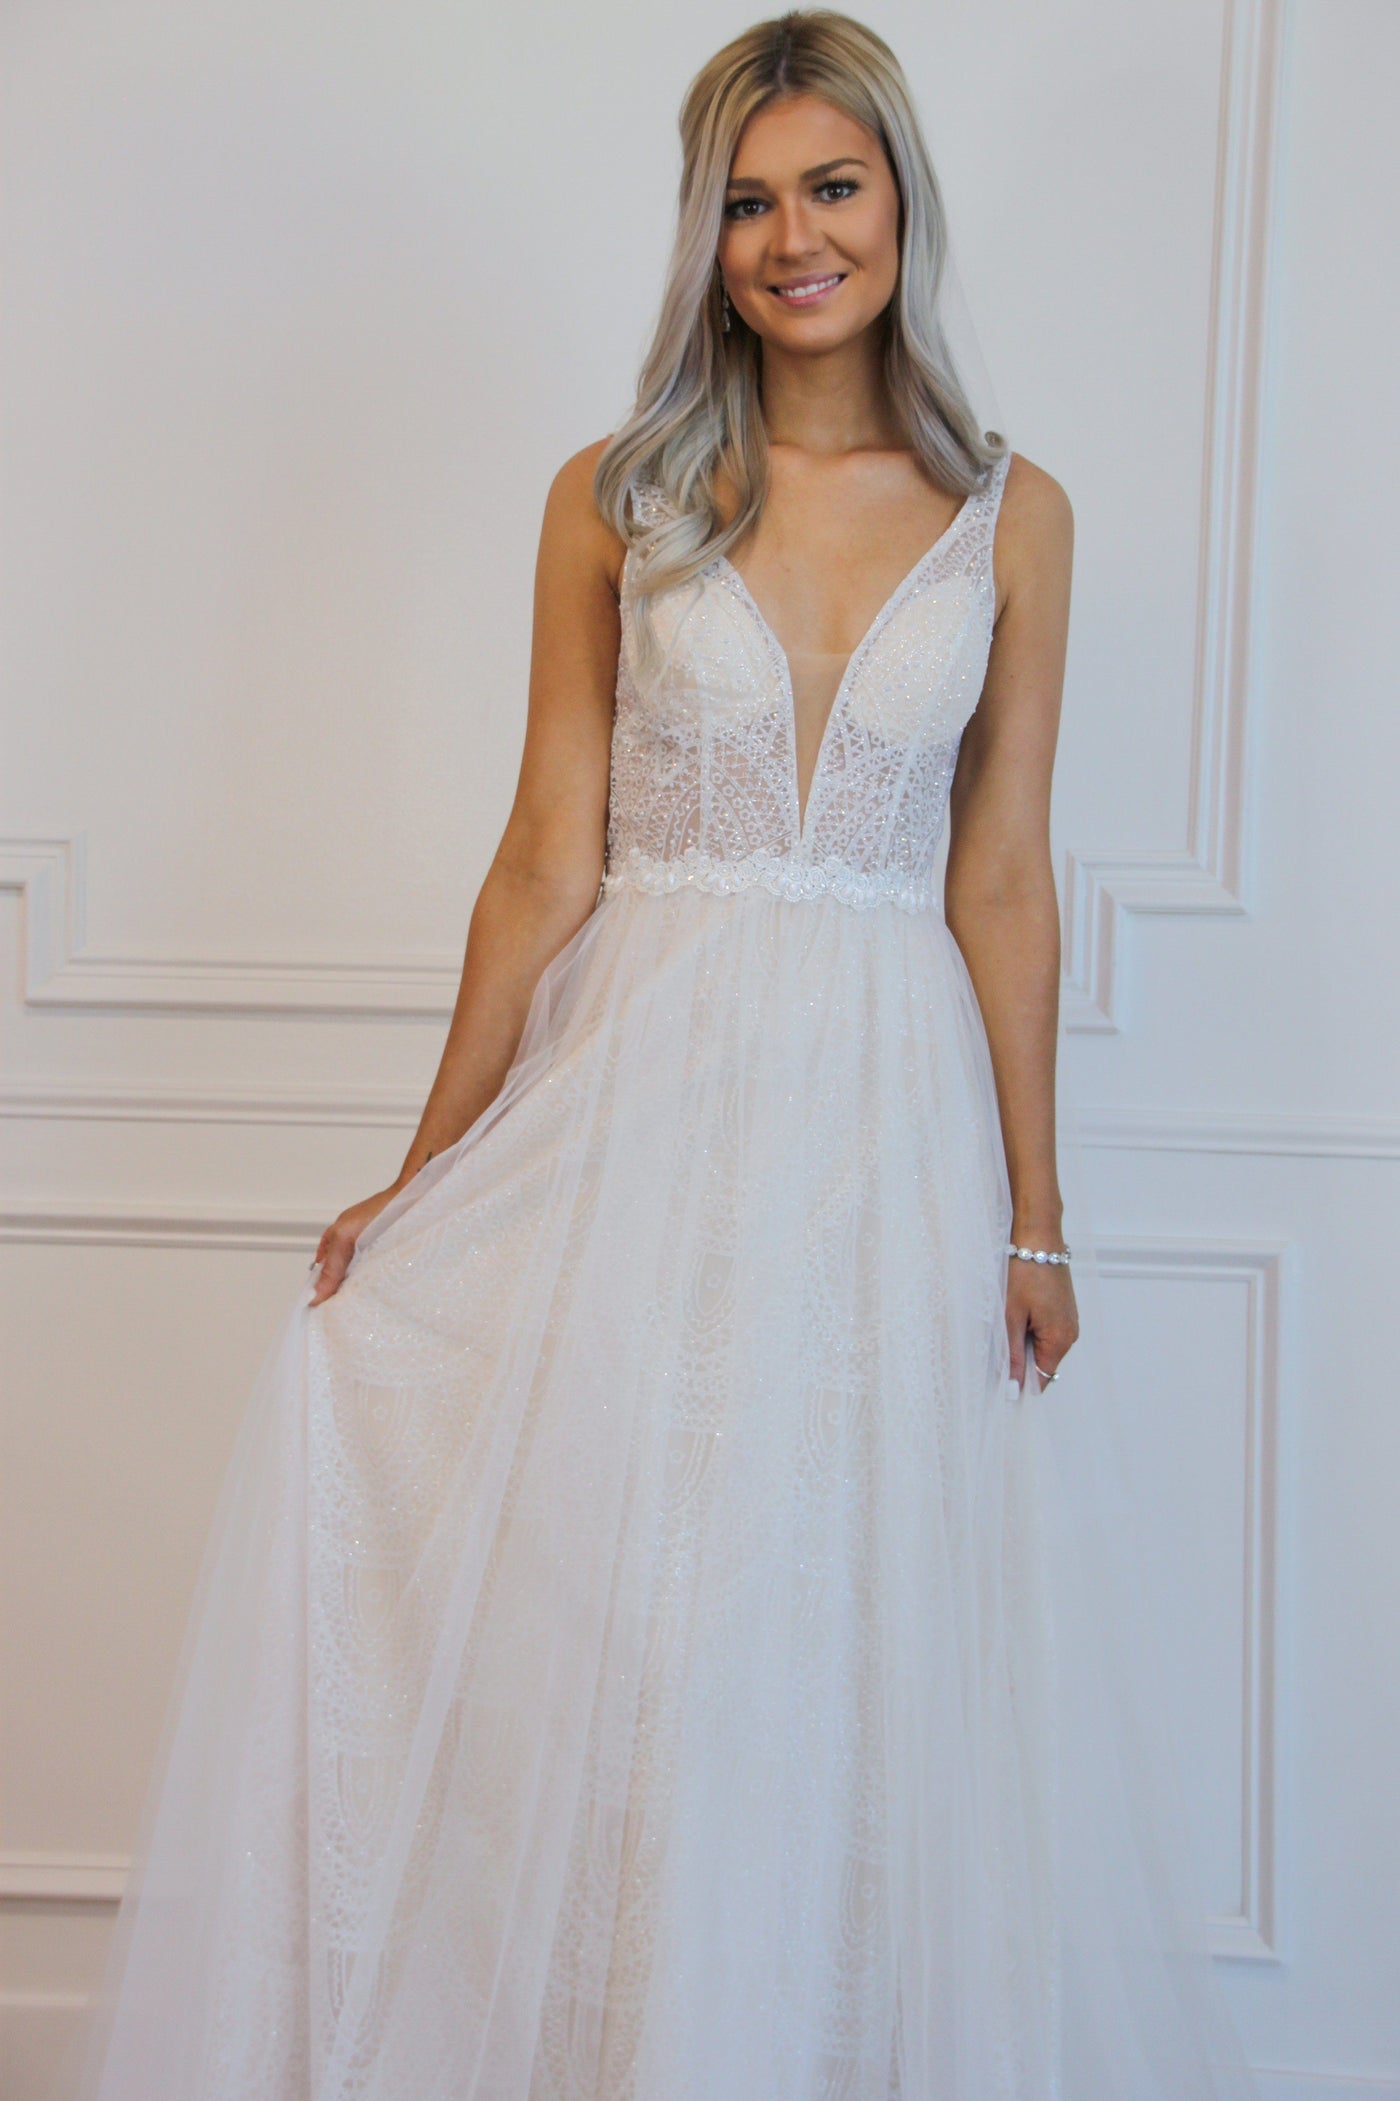 Say I Do Lace Wedding Dress: Ivory/Nude - Bella and Bloom Boutique